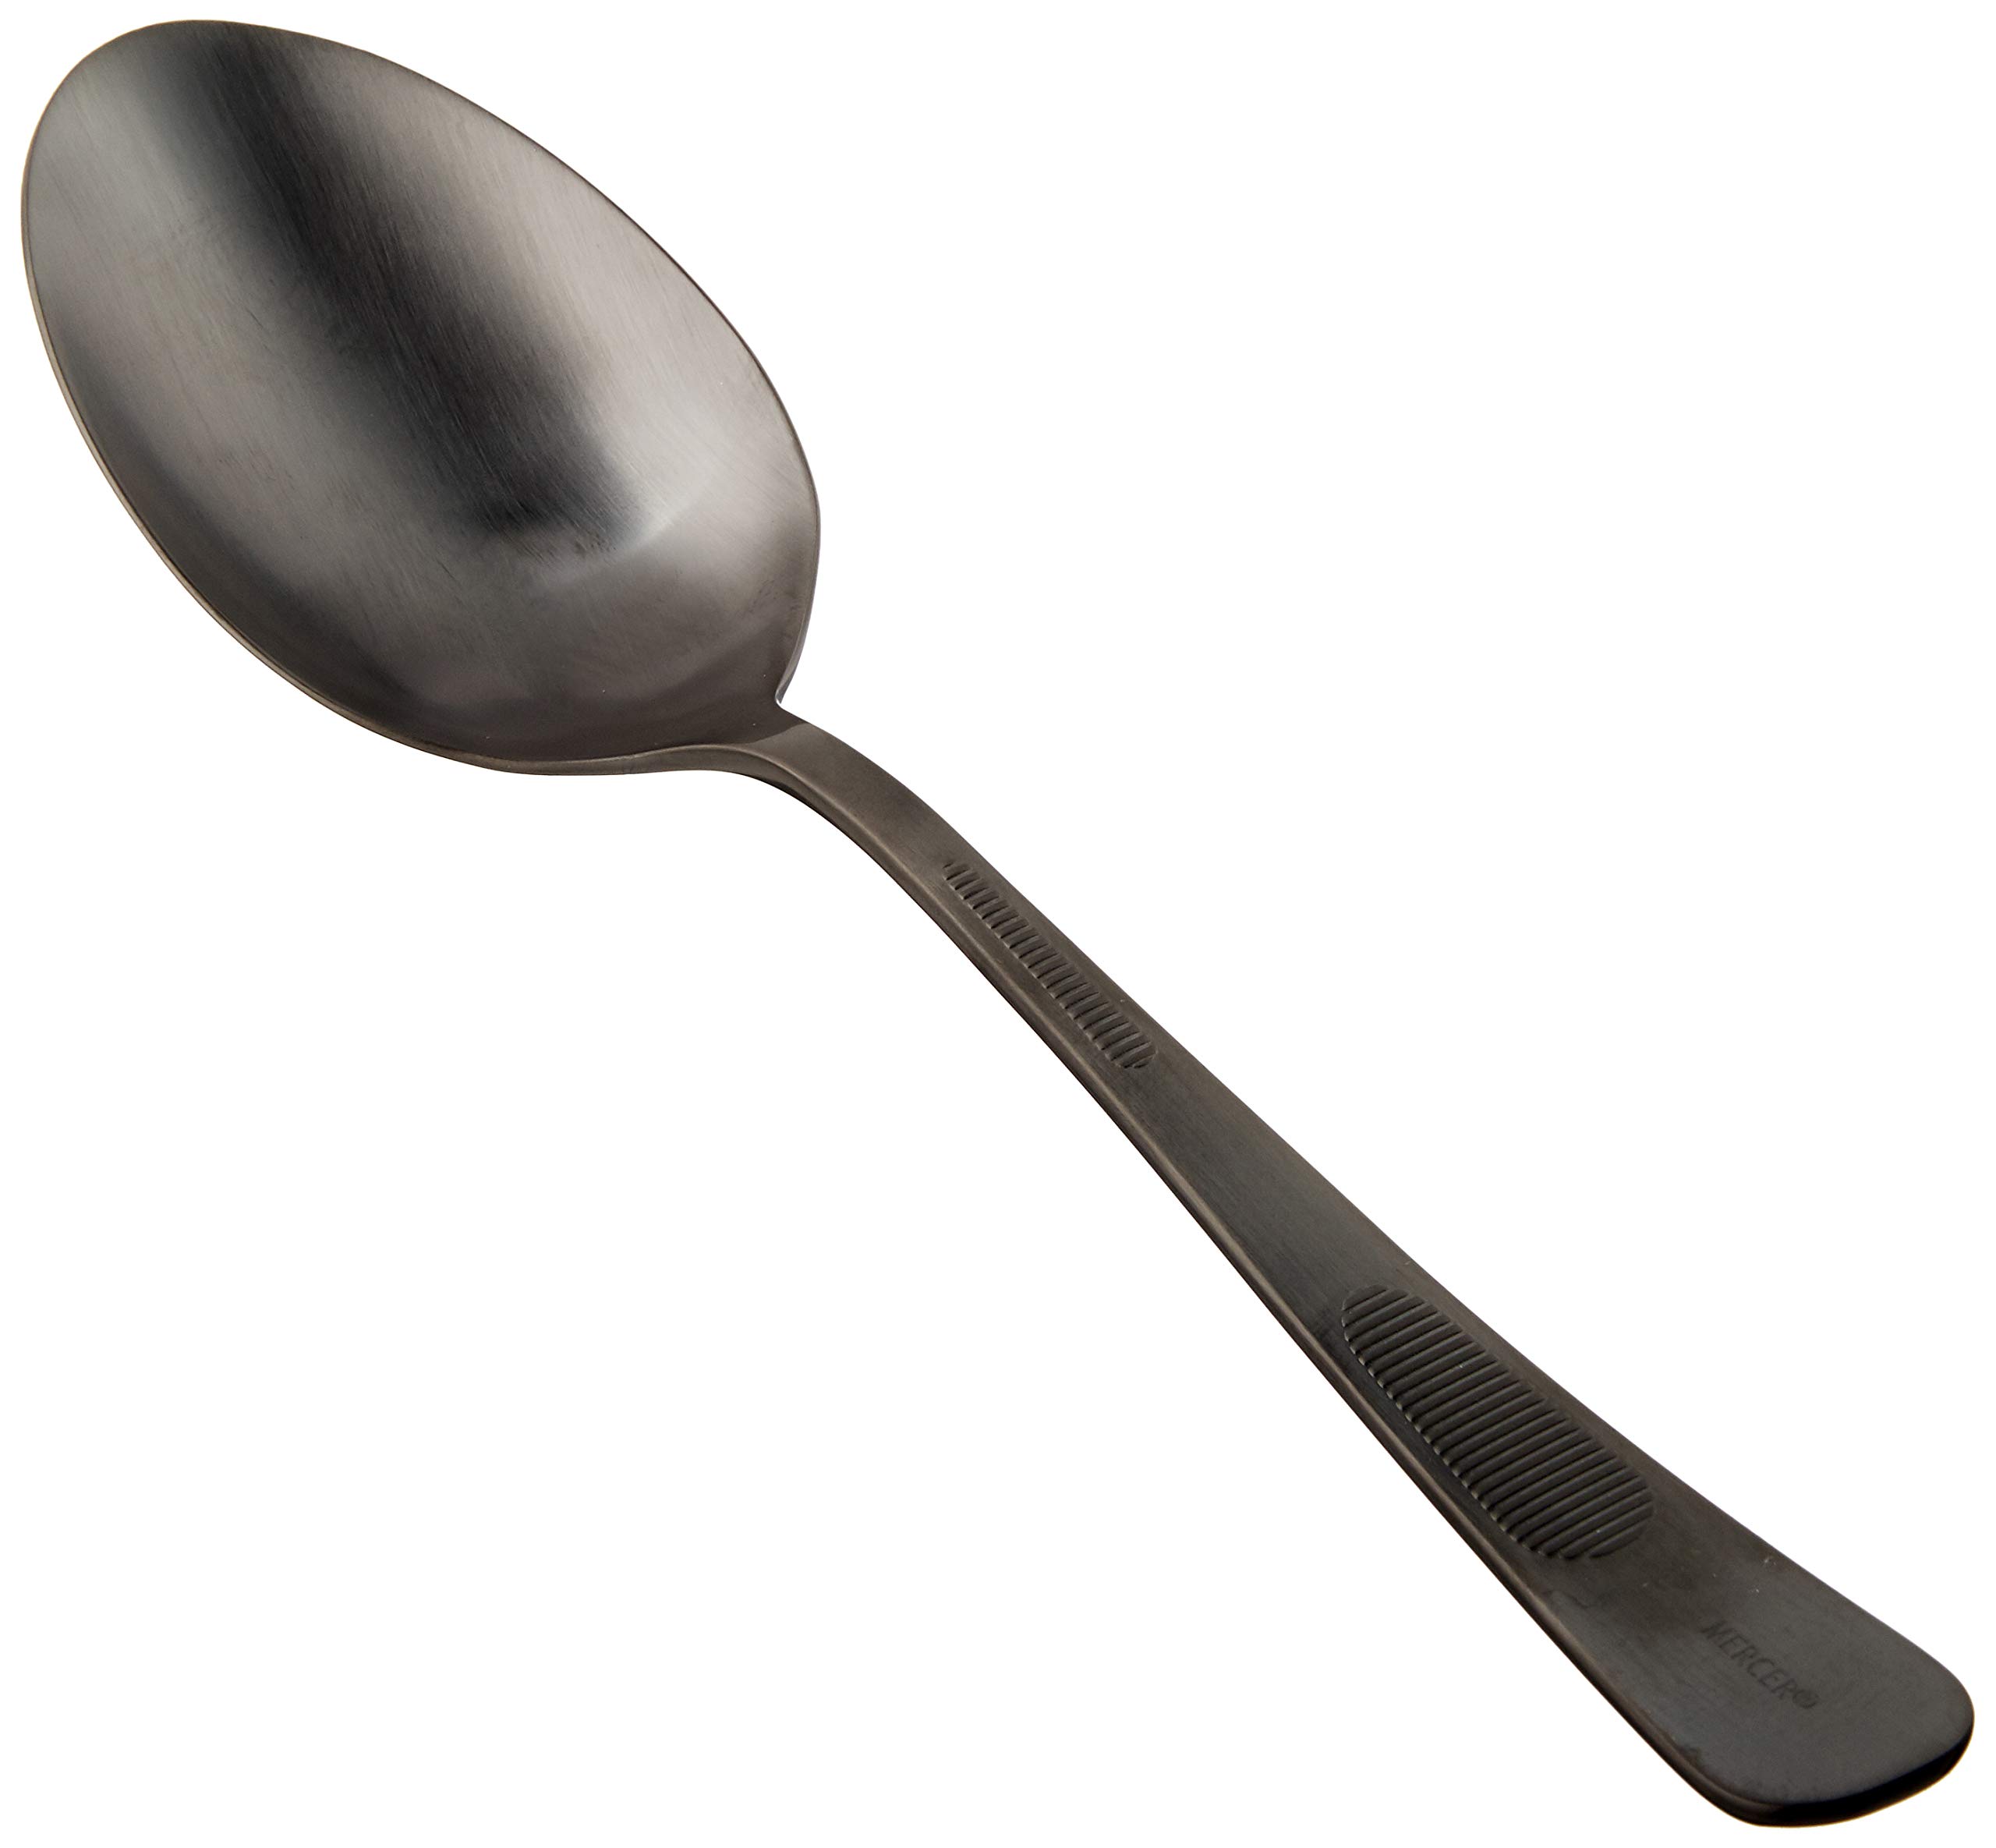 Mercer Culinary 18-8 Stainless Steel Plating Spoon, 9 Inch, Black